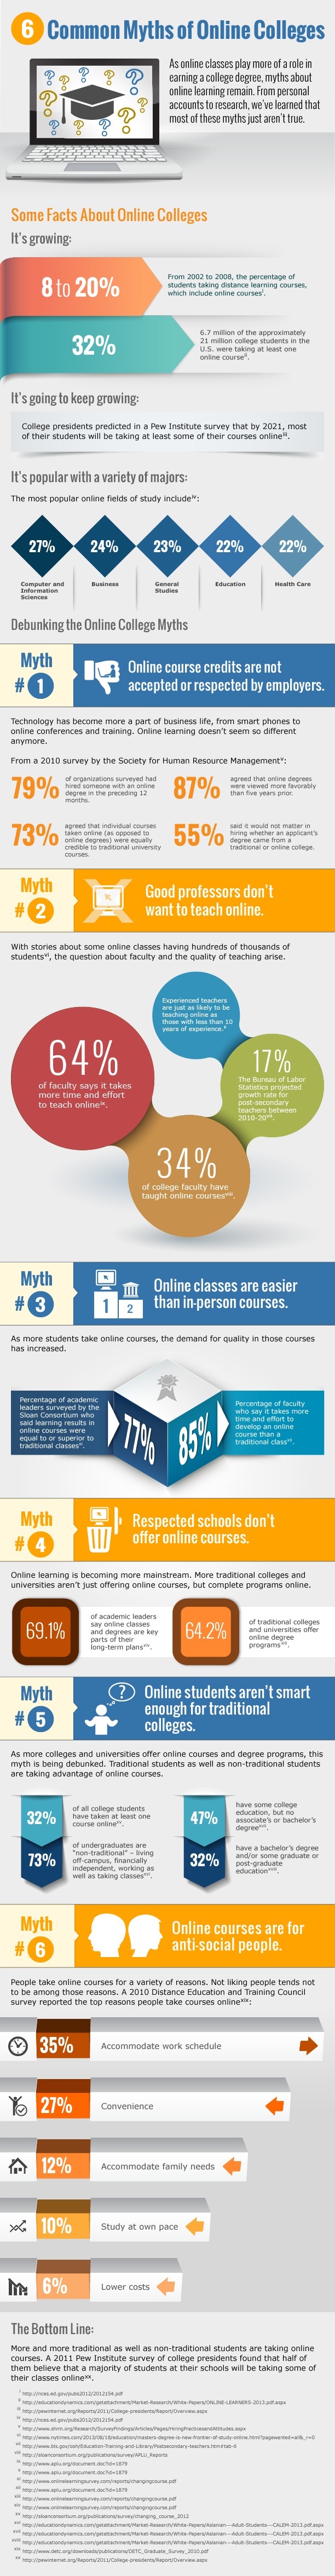 myths of online college